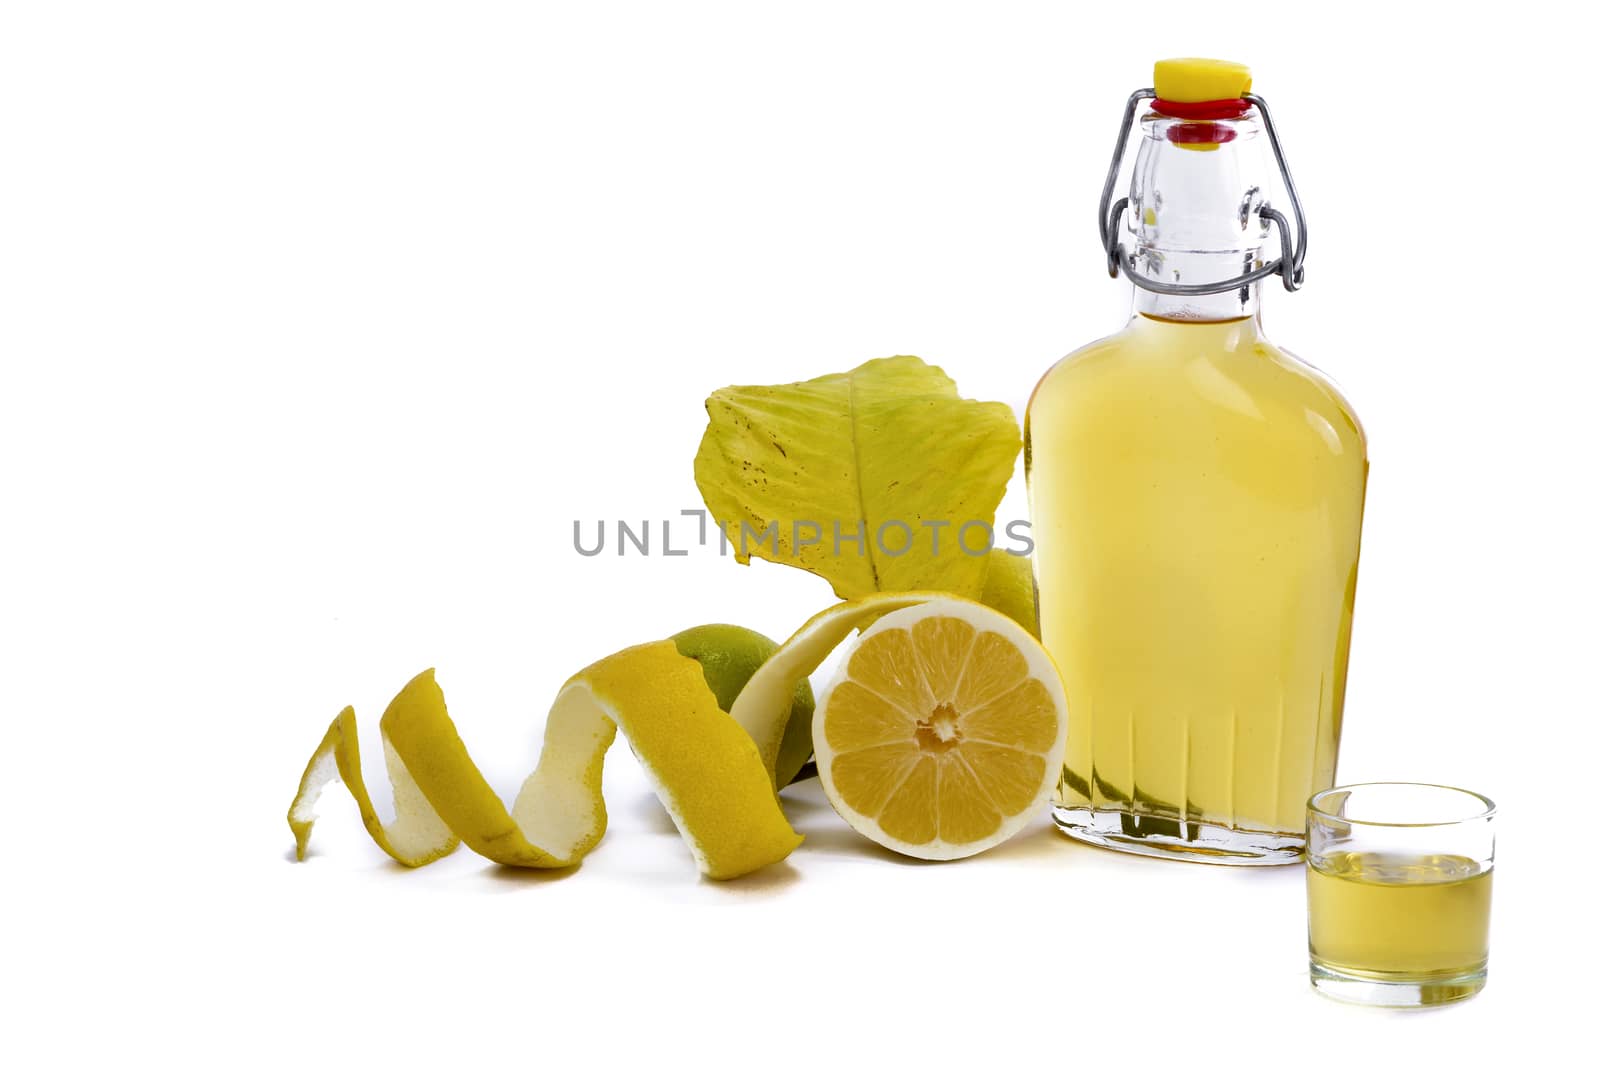 Open glass decanter bottle and shot glass filled with yellow lemon liquor or limoncello or limoncino on white. Peeled natural organic lemon.